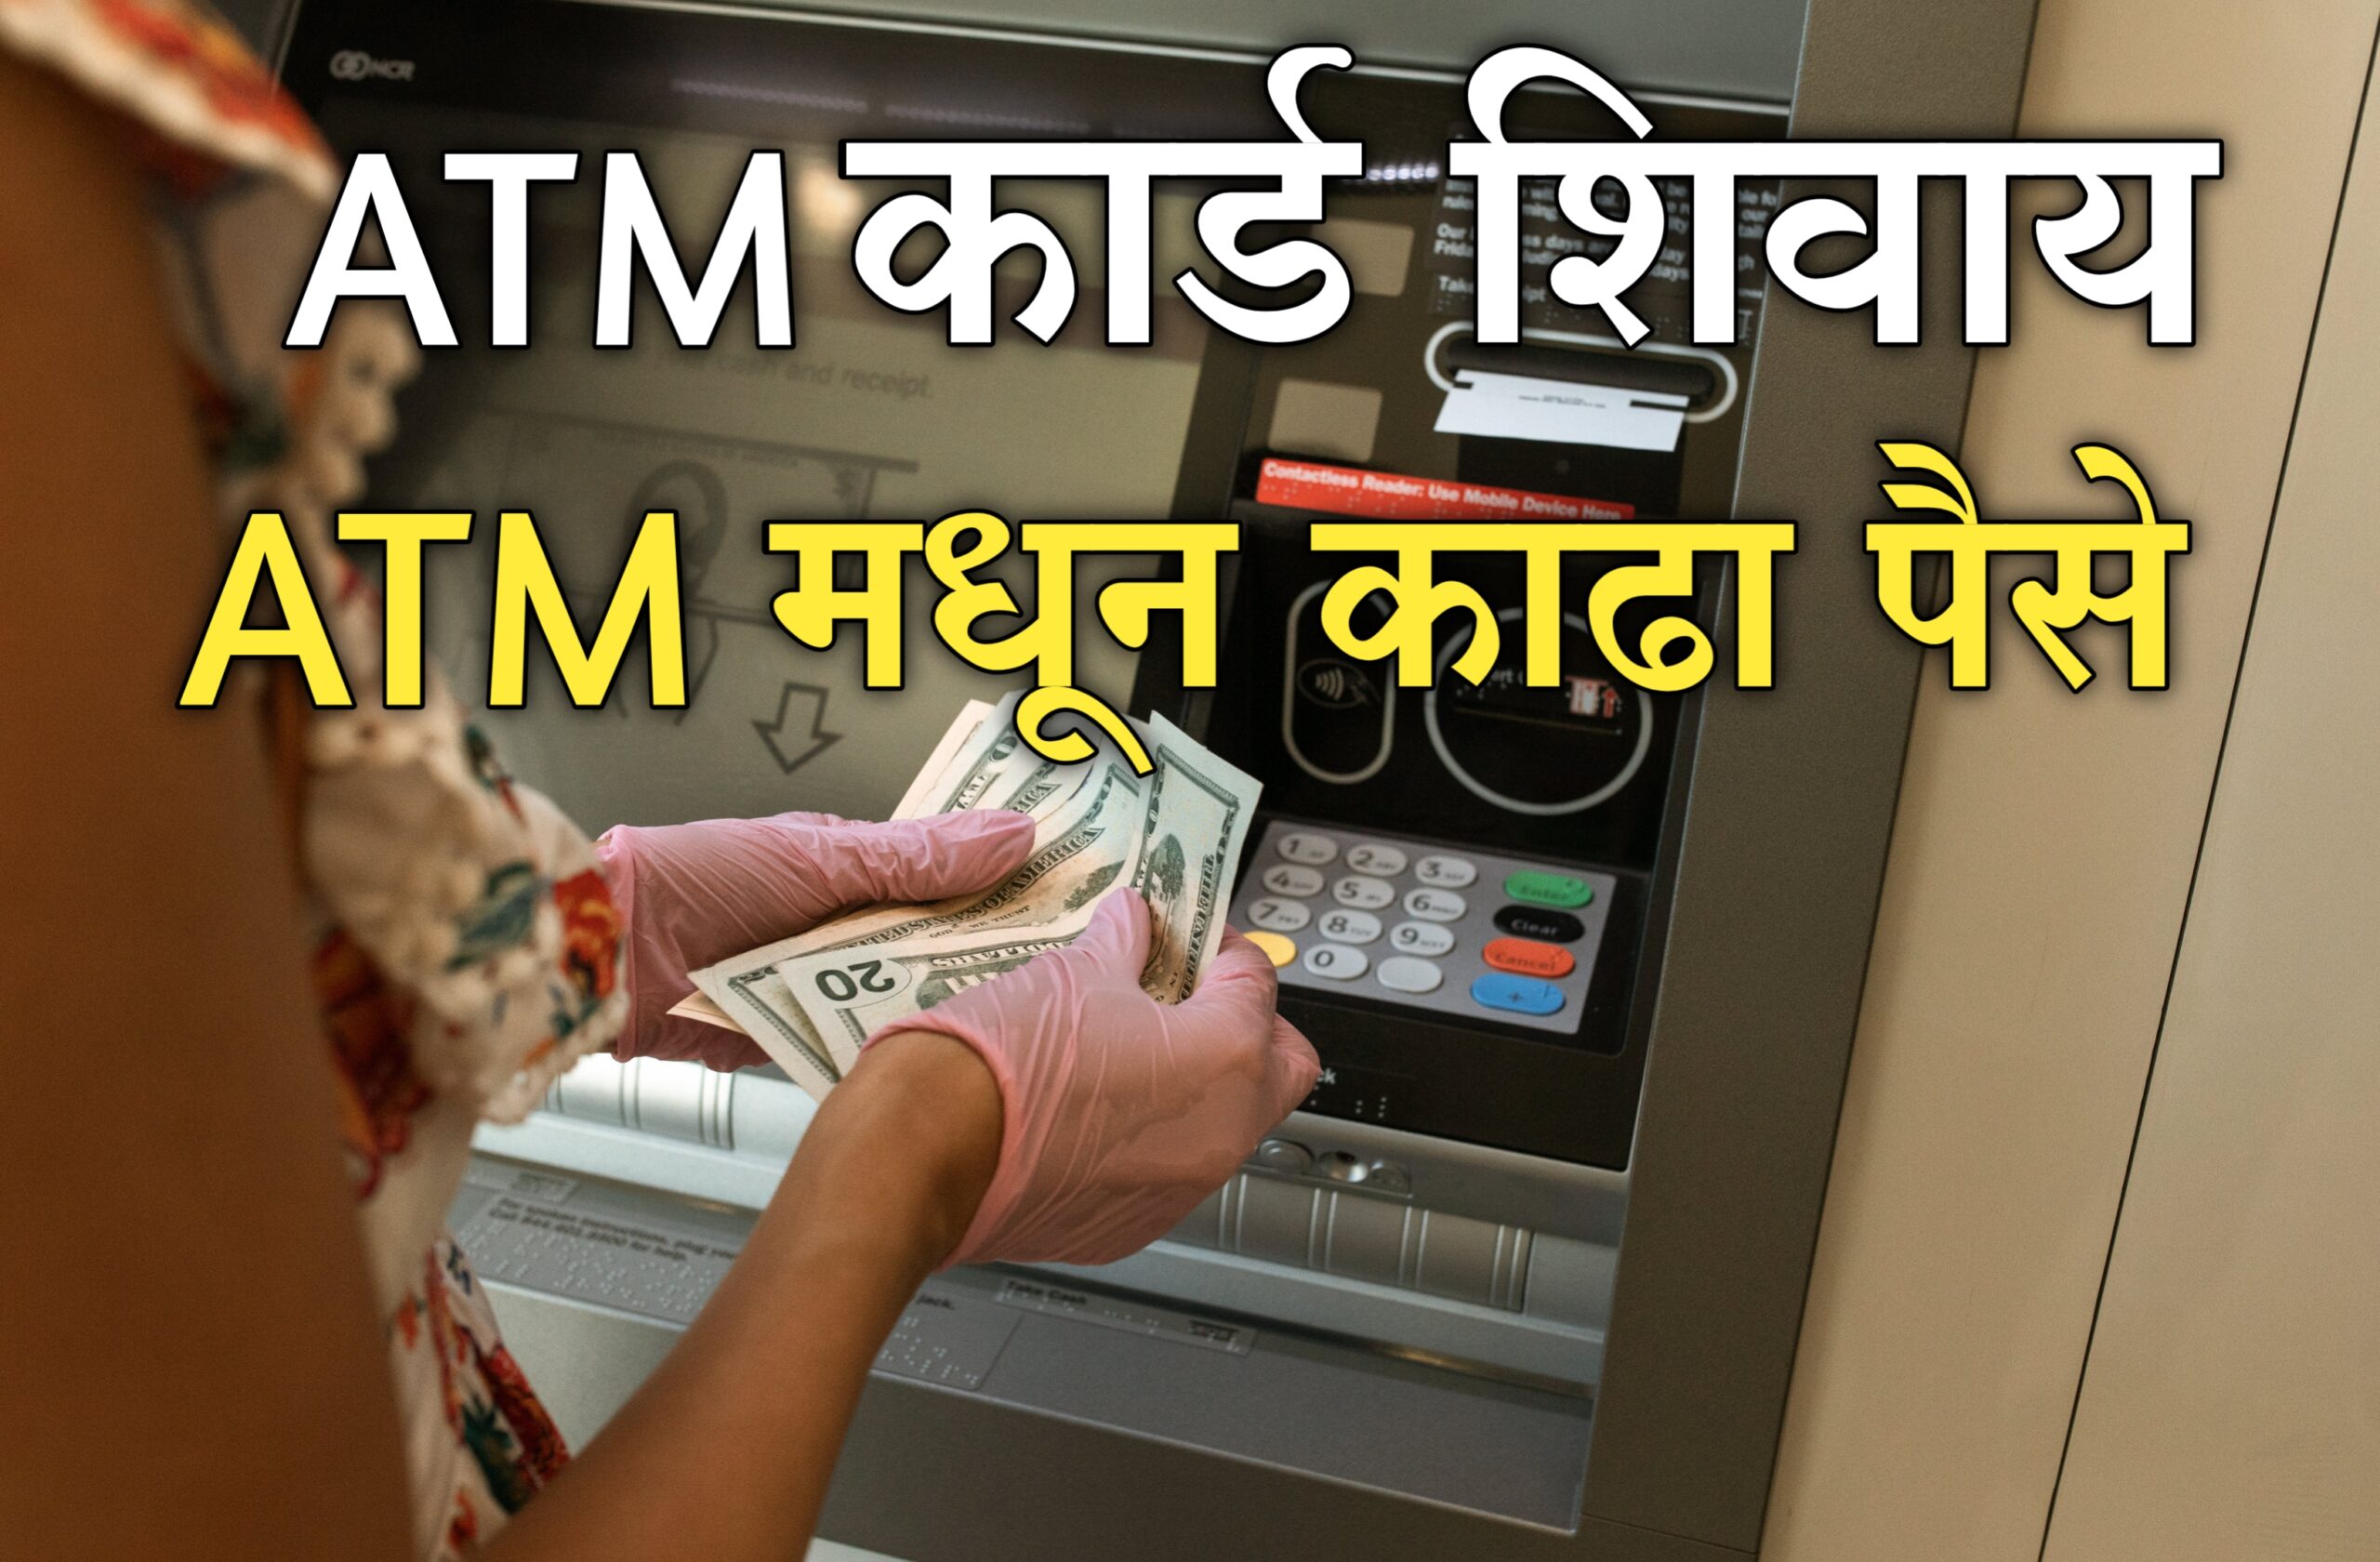 Without ATM Card Money Withdrawal